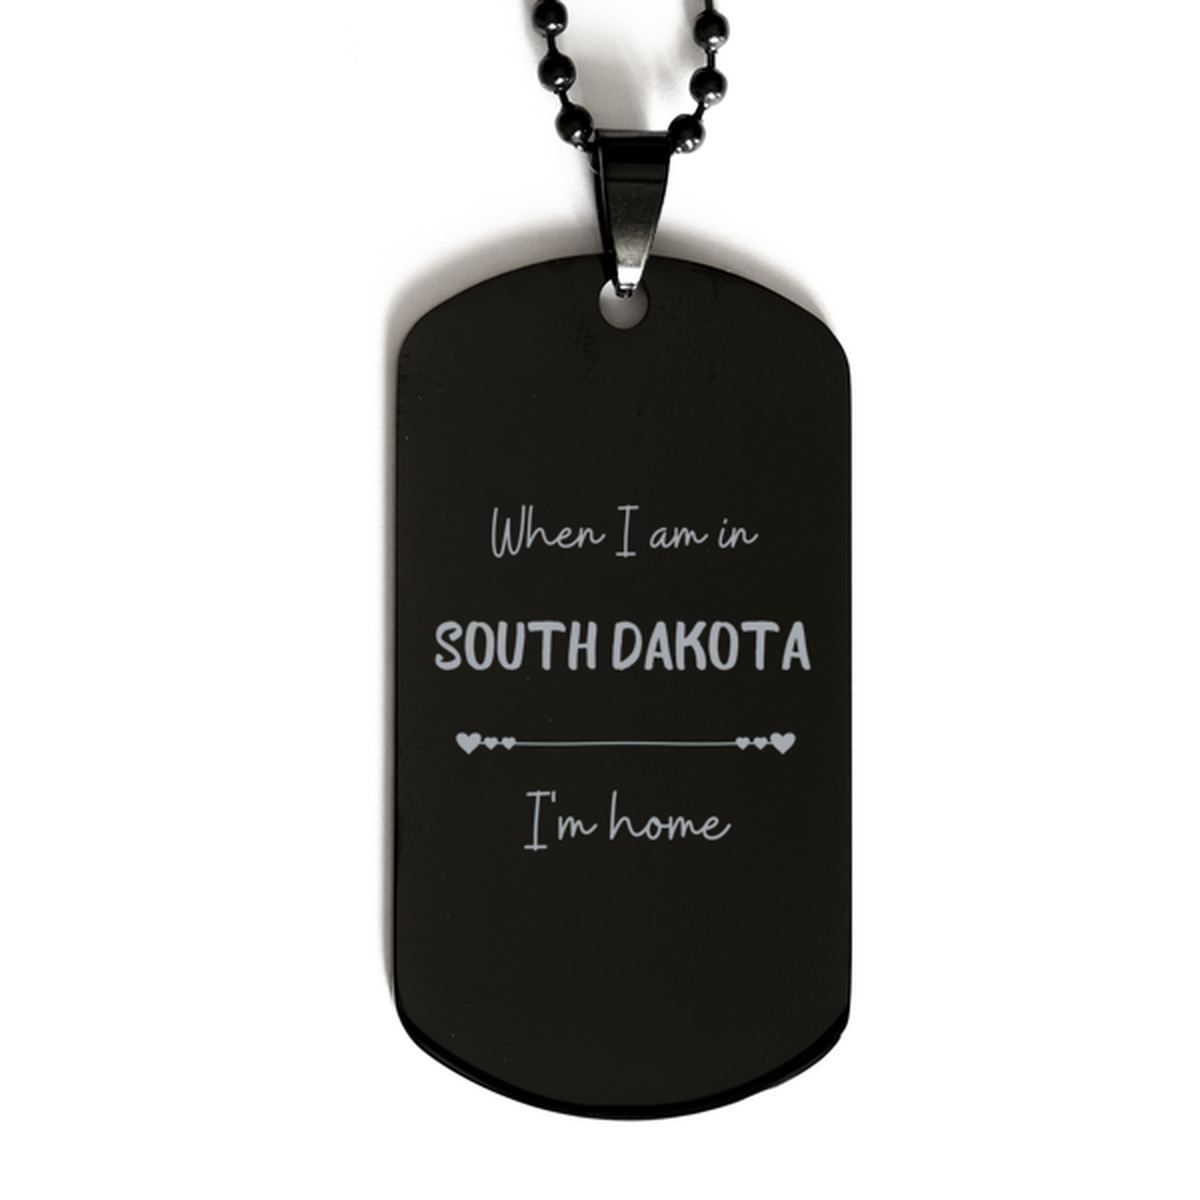 When I am in South Dakota I'm home Black Dog Tag, Cheap Gifts For South Dakota, State South Dakota Birthday Gifts for Friends Coworker